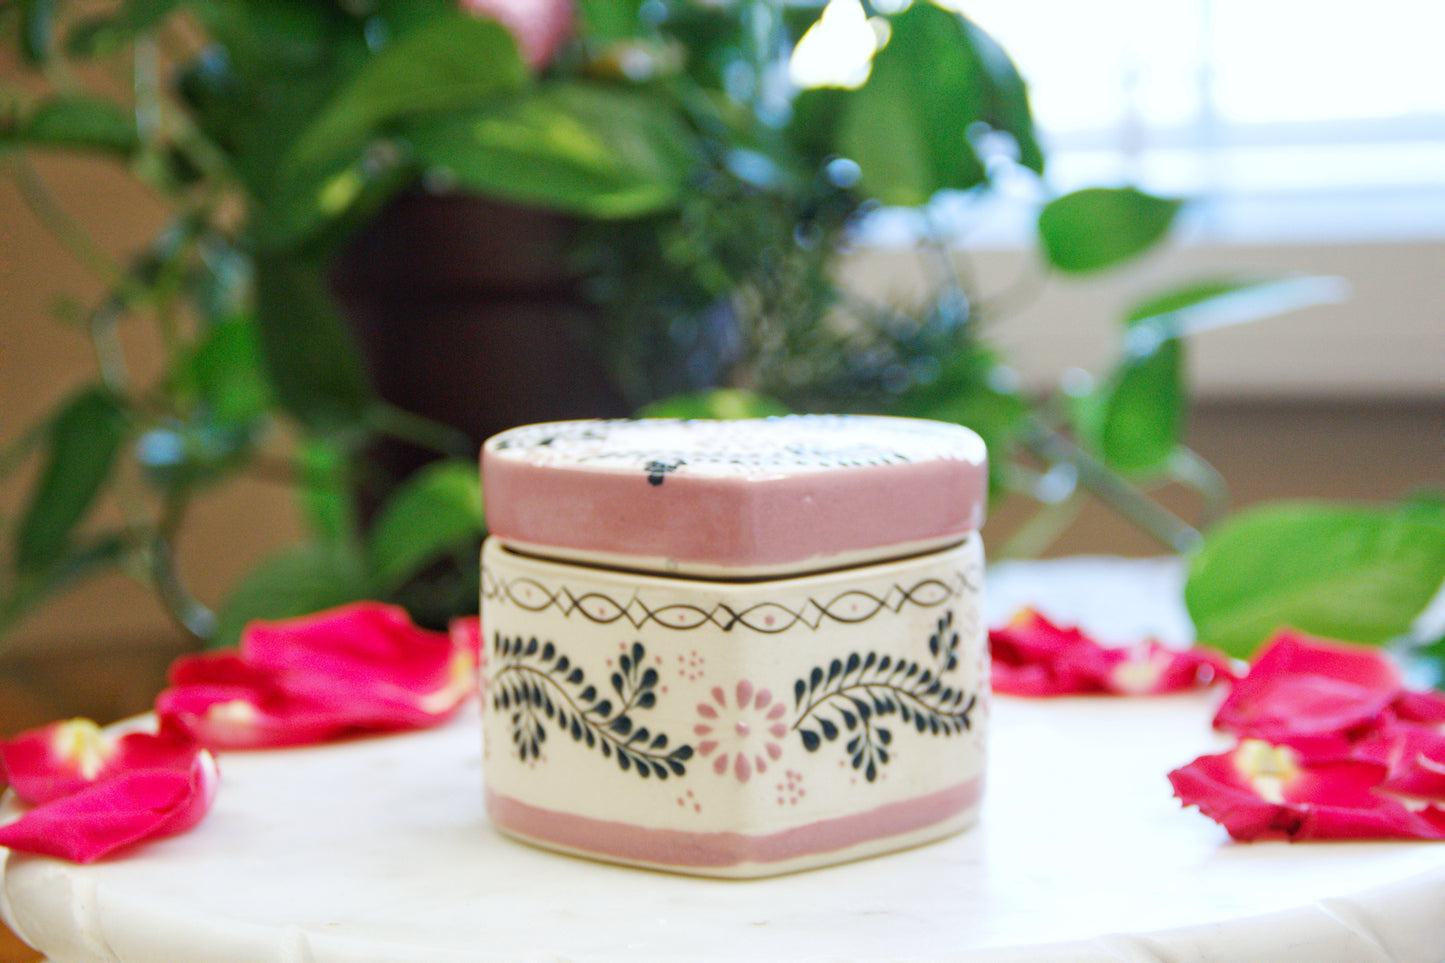 Artisanal candle in a beautiful heart shaped talavera. Handmade pink floral design with a closed lid. Handcrafted by Artisan in Mexico City. 100% All Natural Soy Candle. Reuse the talavera as home decor or storage.